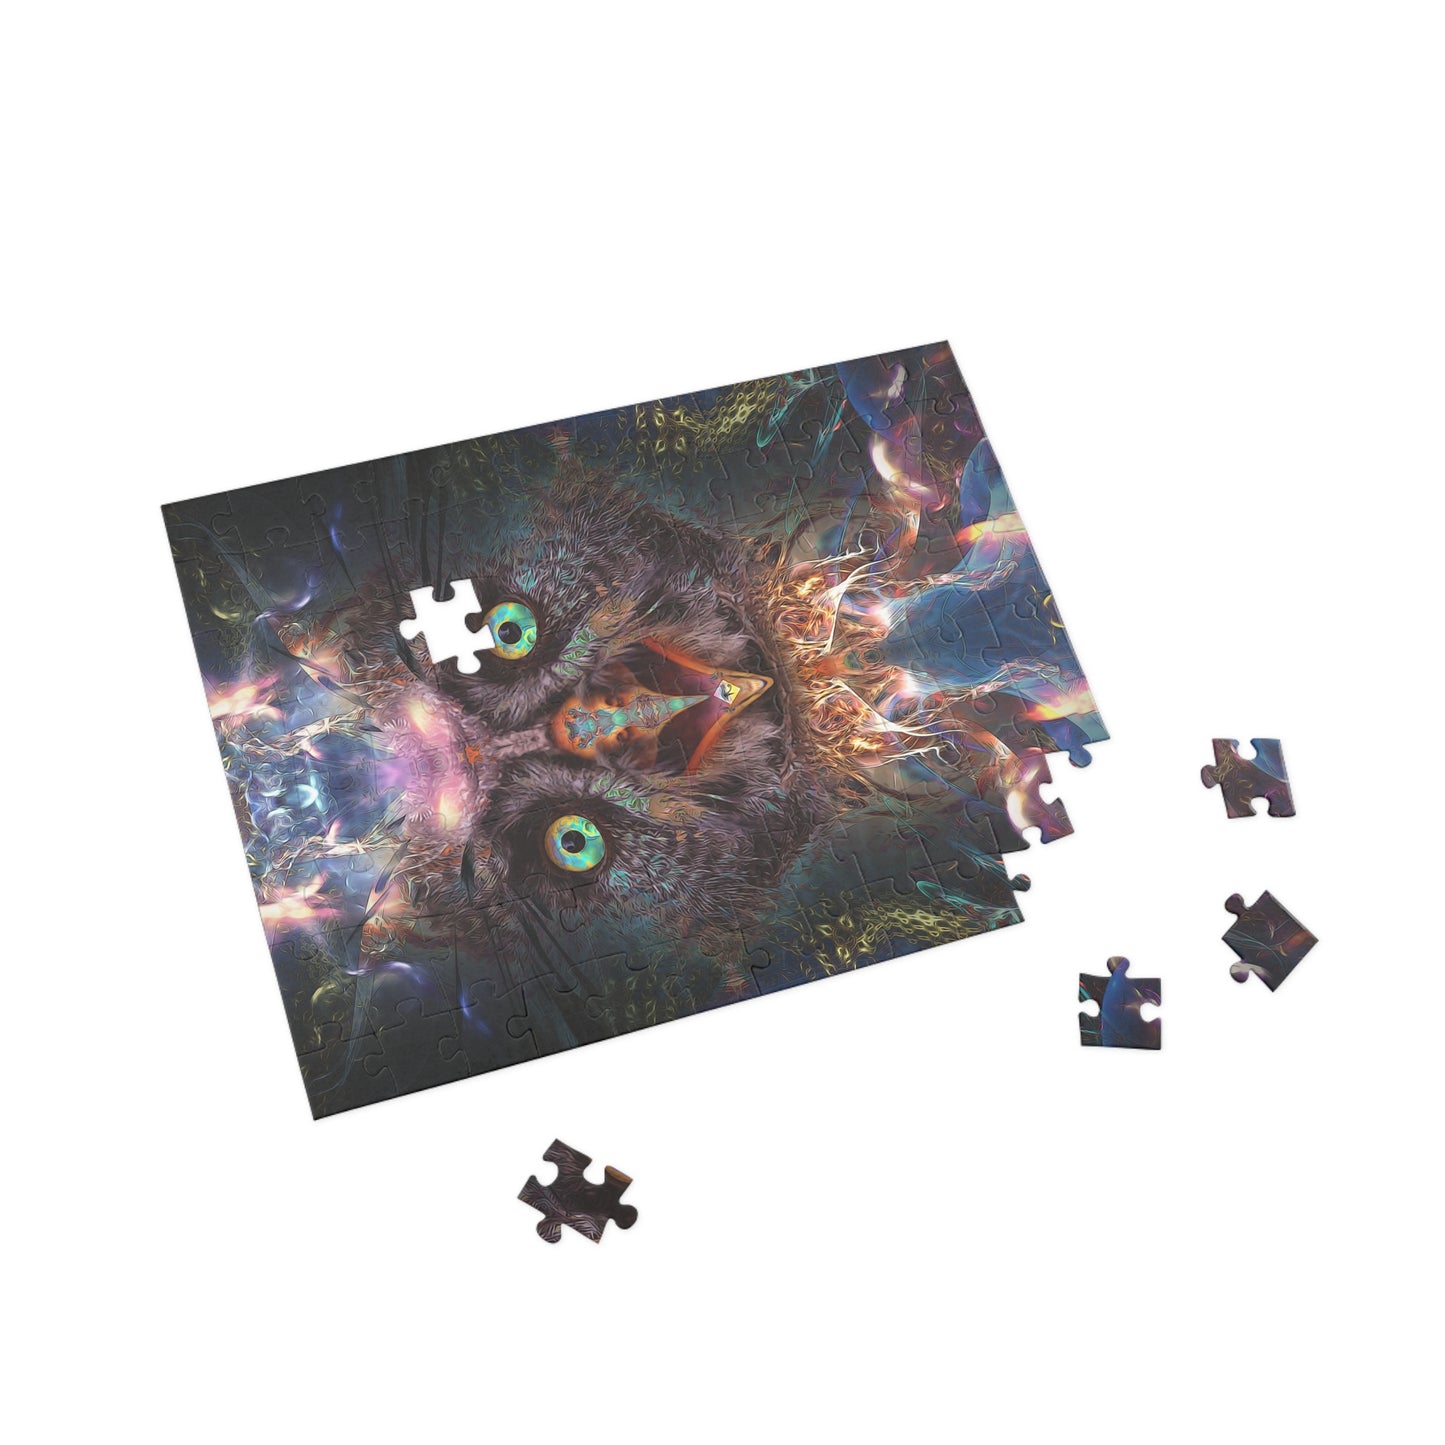 "Complete Awareness" Jigsaw Puzzle (96, 252, 500, 1000-Piece)